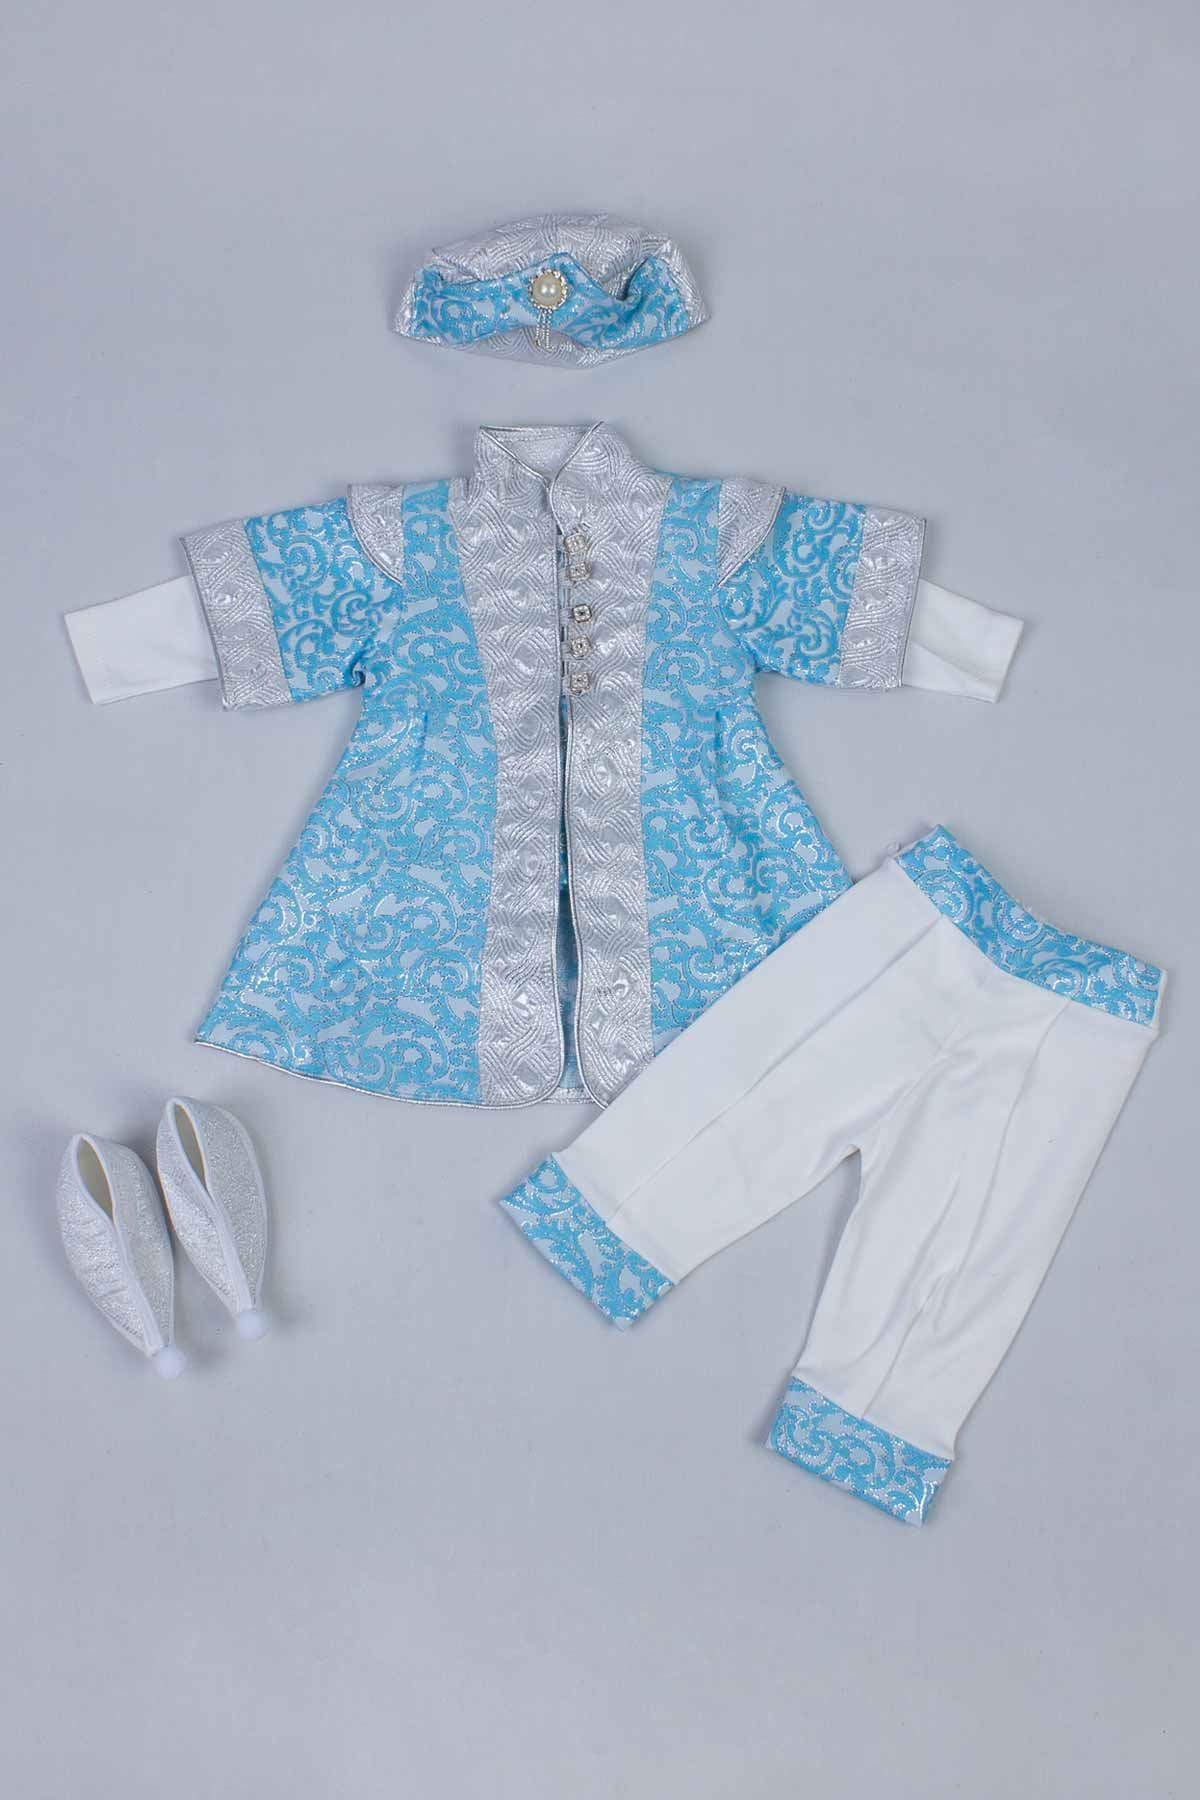 Blue Boy Baby Suit Prince Ottoman Prince Gentleman Formal Dresses Boys Babies 5 Piece Set Male Clothing Special Occasions Outfit Models